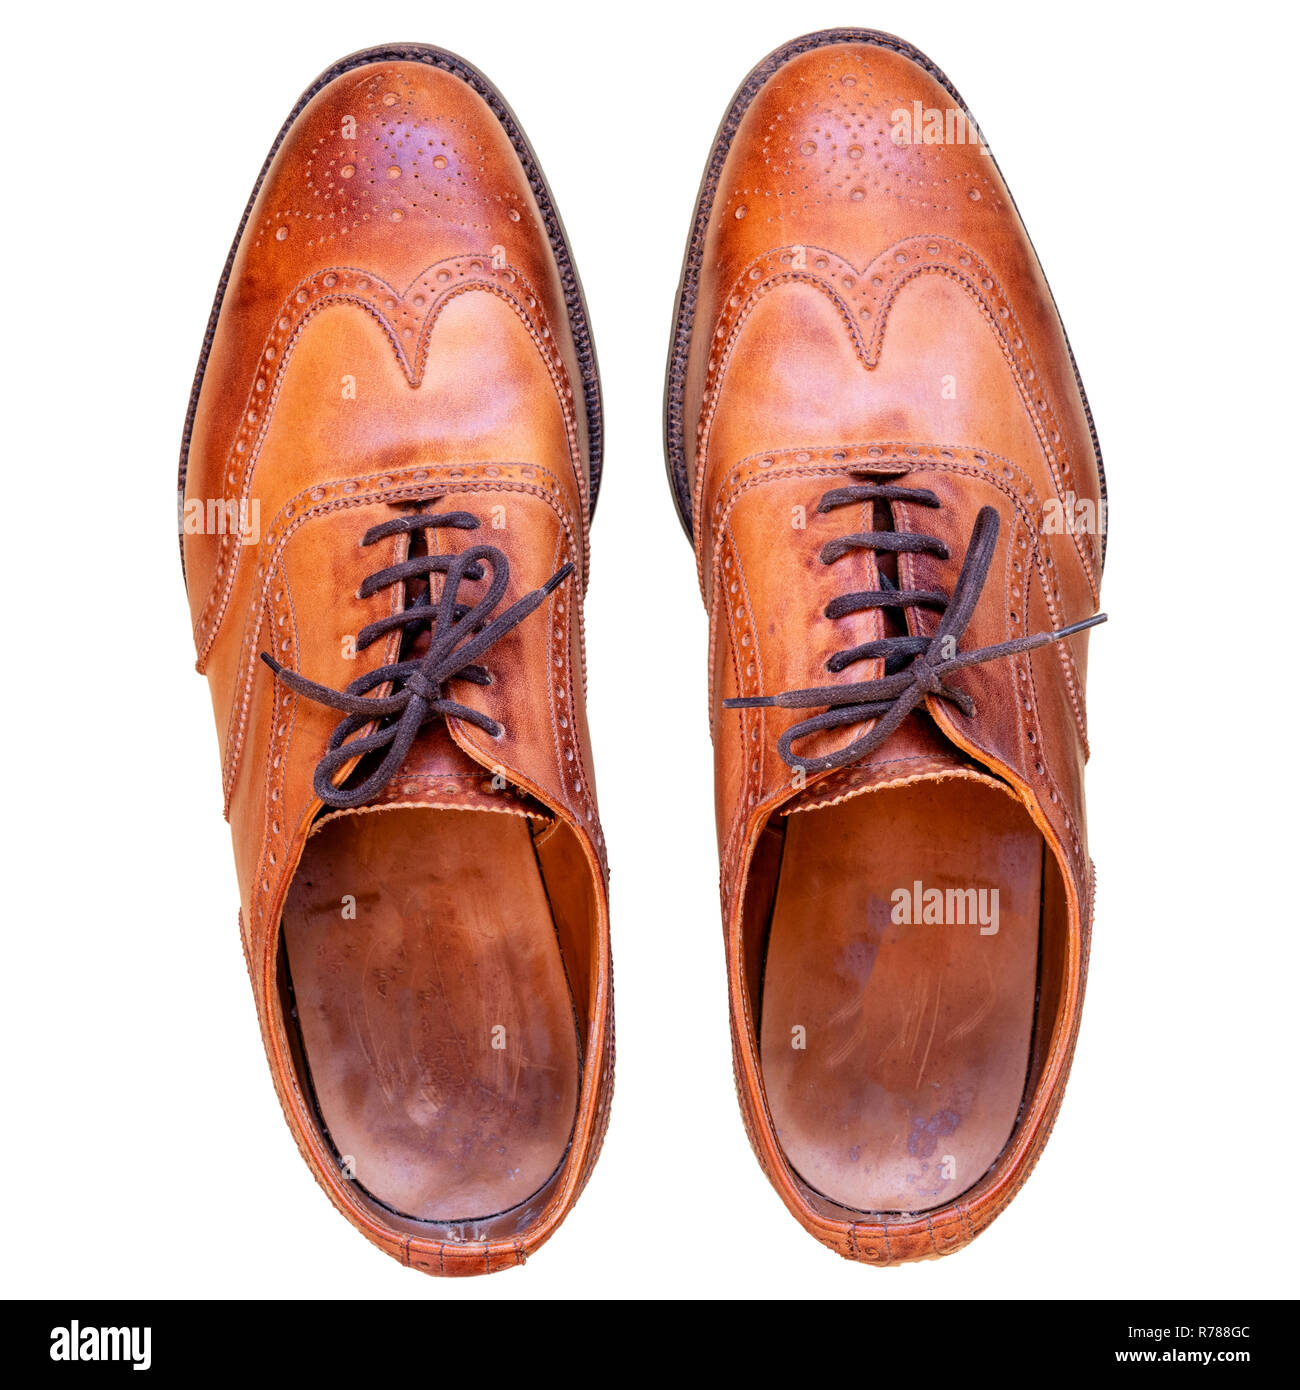 Tan brogues cut out on a white background. Mens used brown leather shoes shot from above. Stock Photo